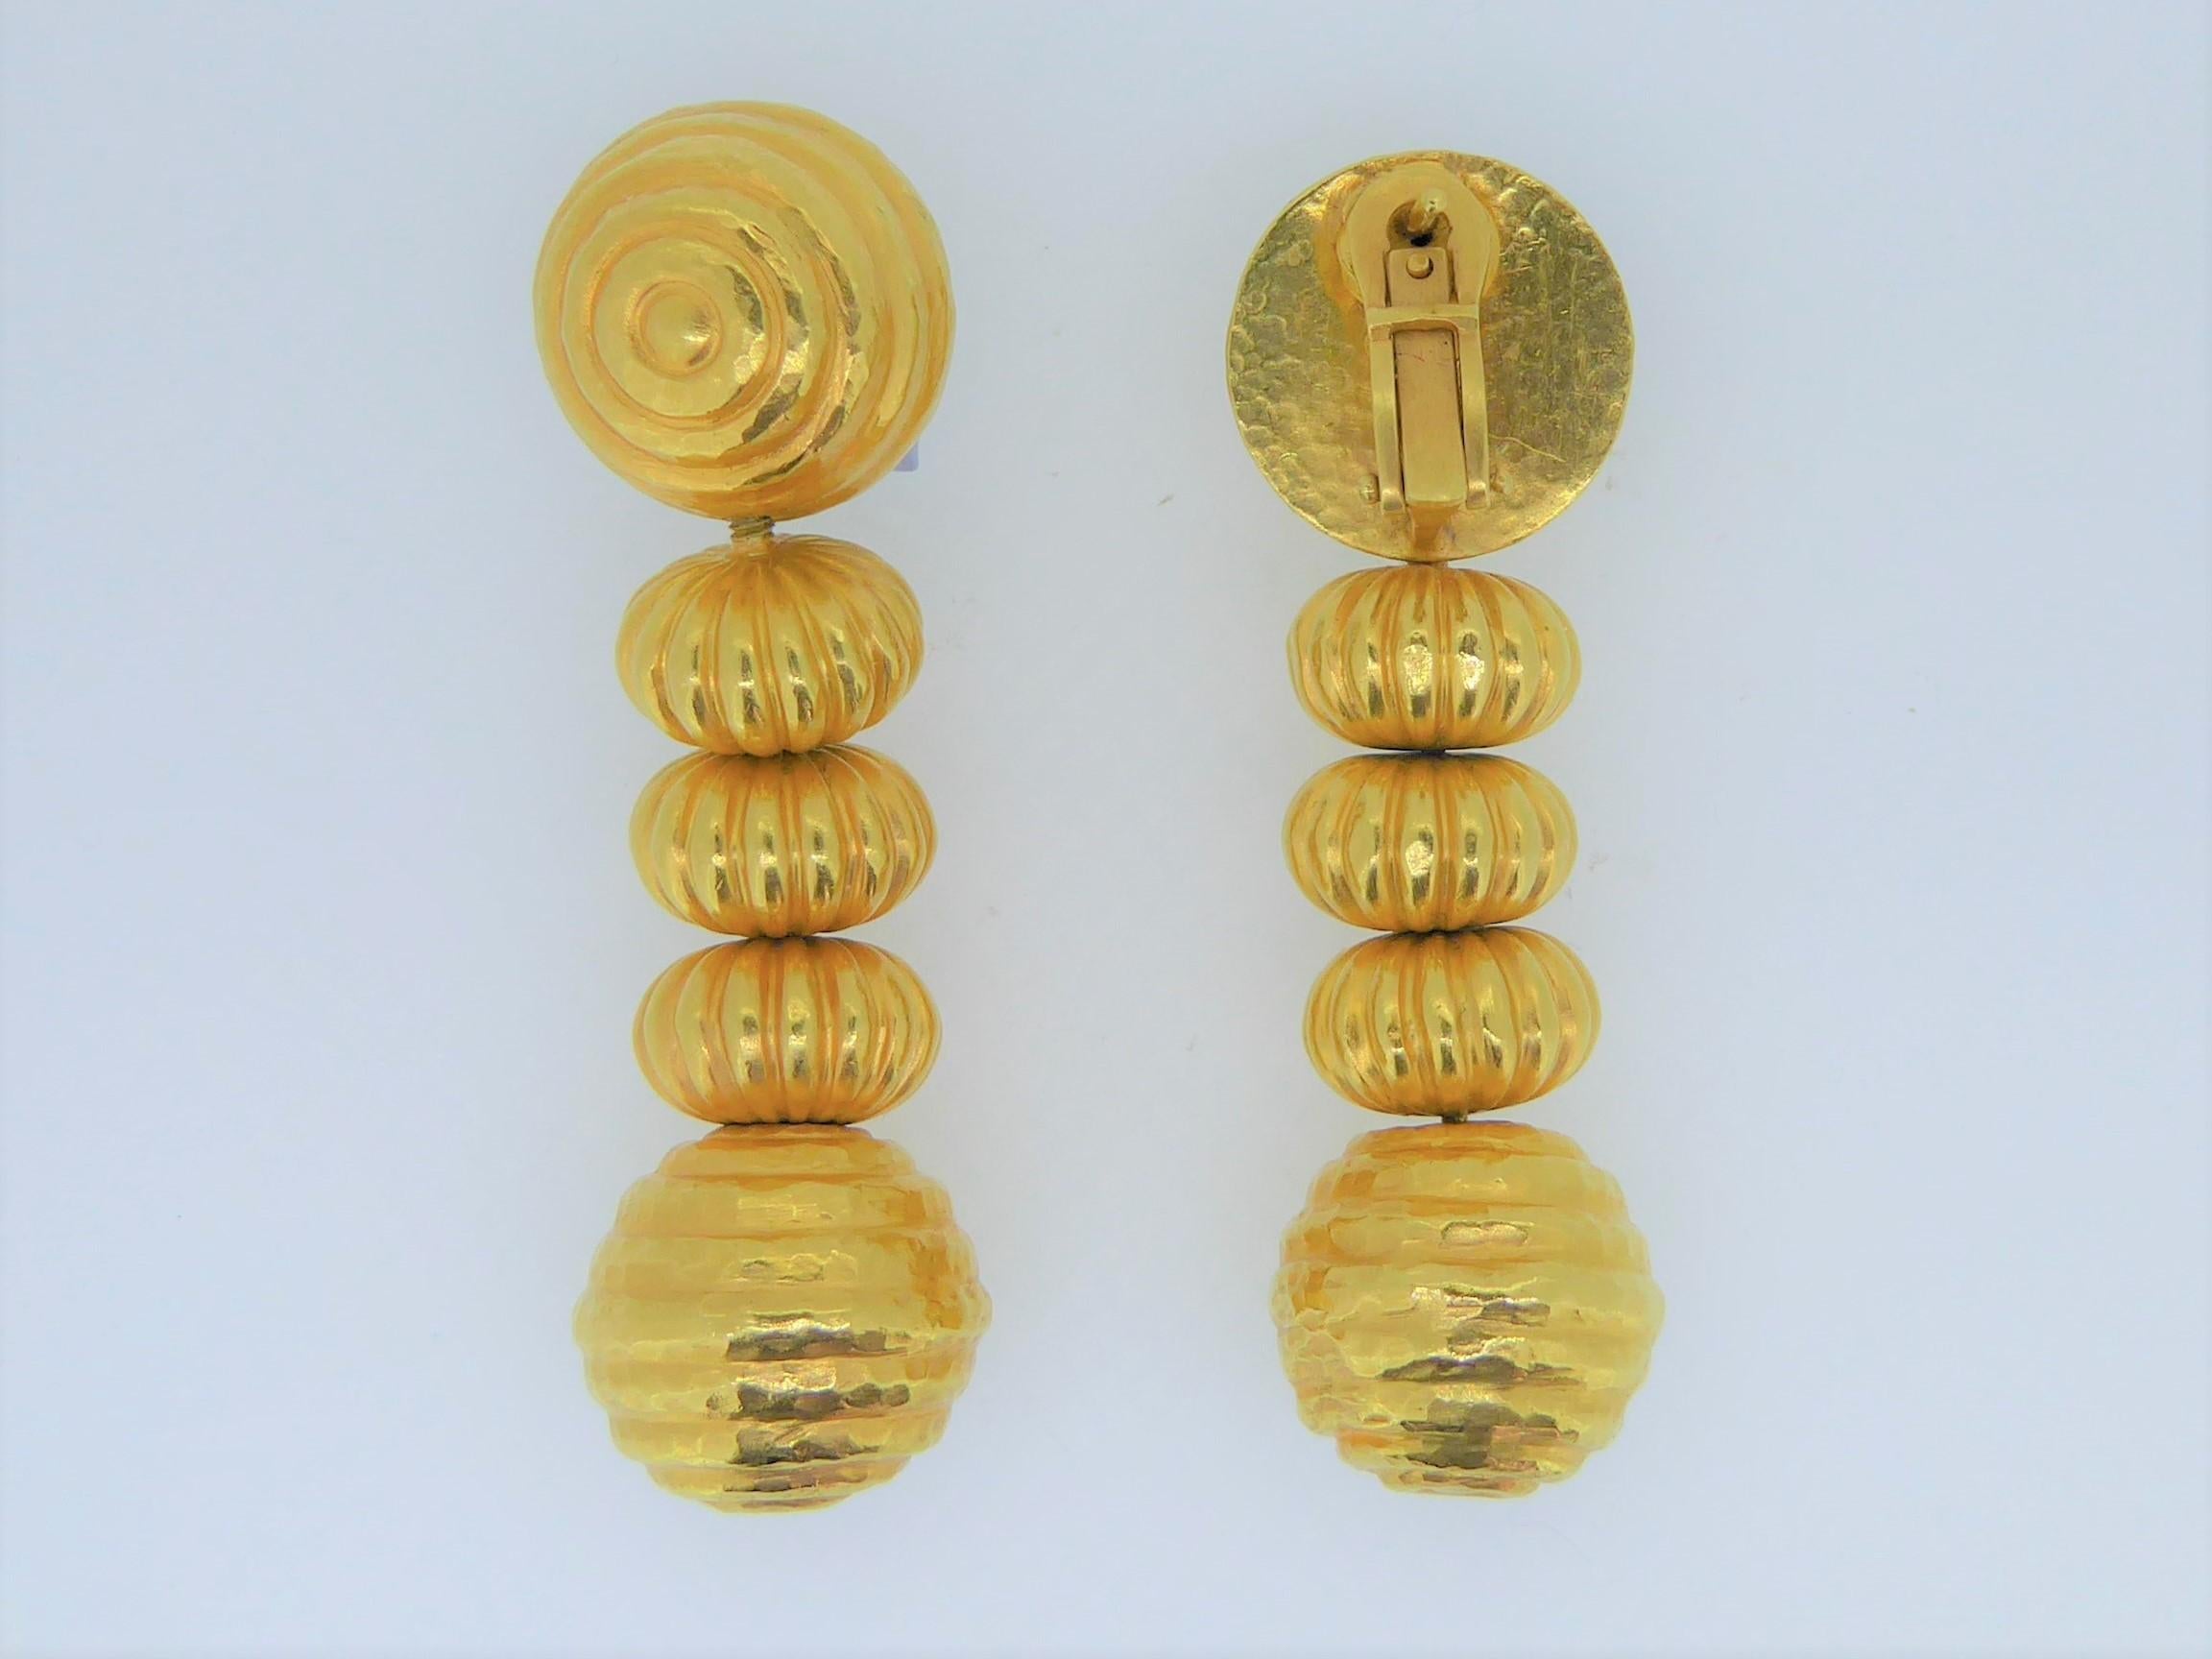 A Lalaounis 22 Carat Yellow Gold Minoan Bead Pendent Earrings. Circa 1970s. The 22ct hammered yellow gold bead earrings, each with removable drops. All on a beautiful and intricate 22ct hand-woven chain. Each earring stamped 